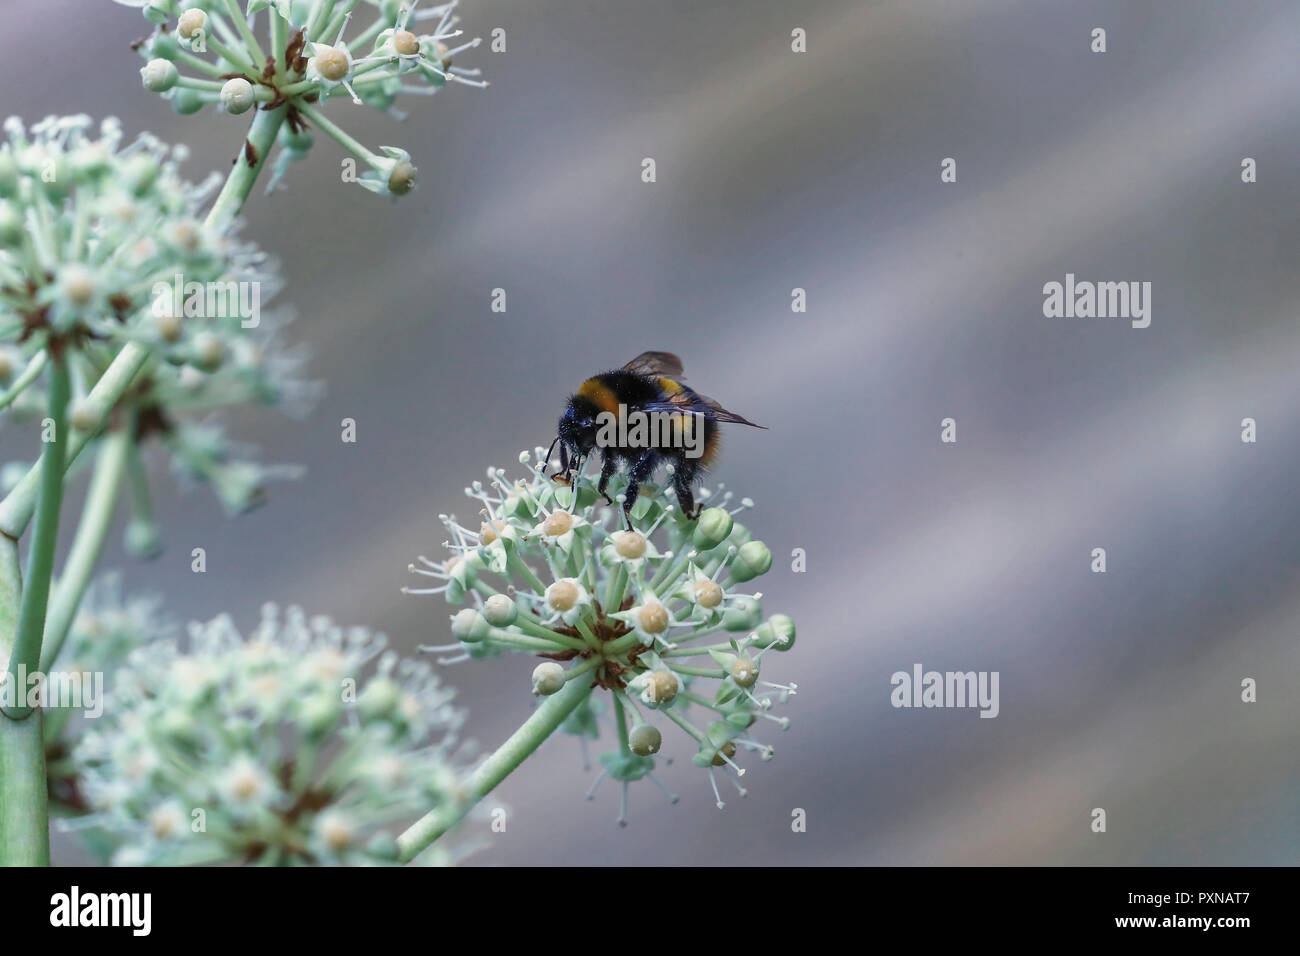 Bumble Bee on flower in garden Stock Photo